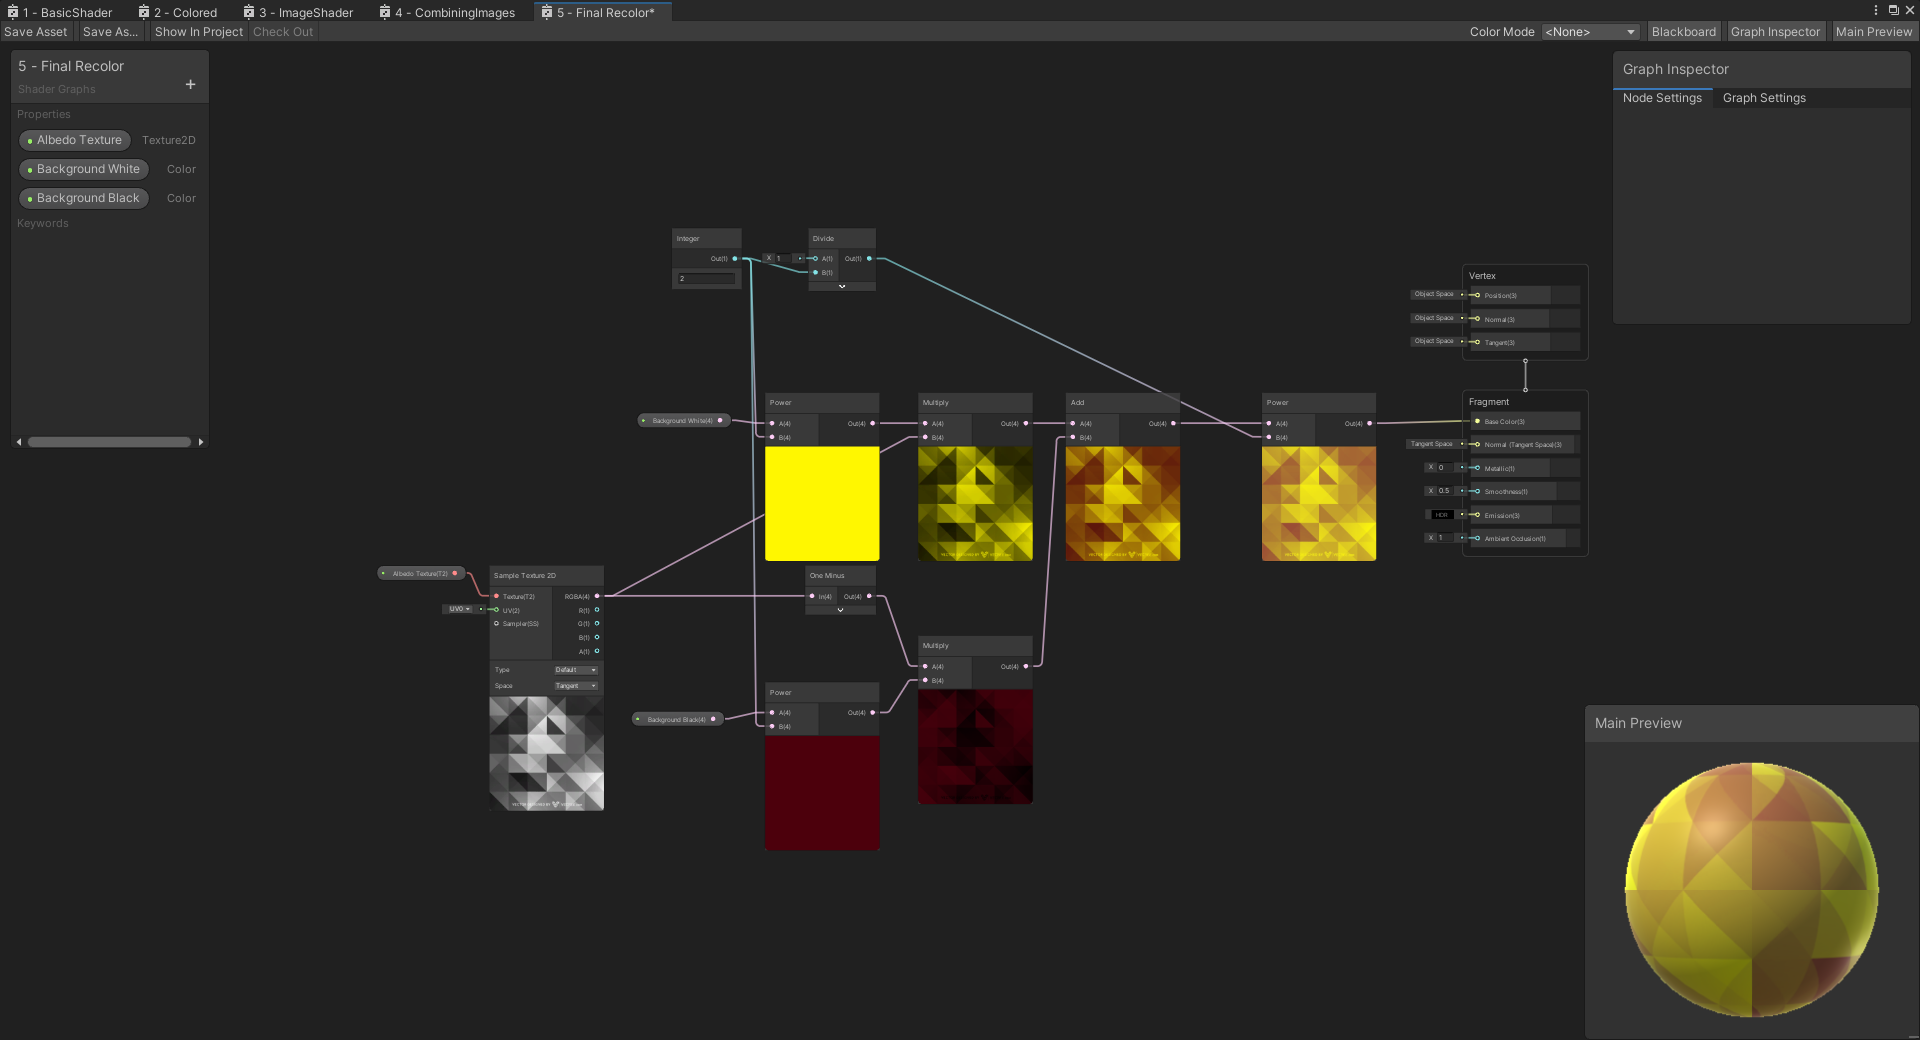 Rendering of the stages within one of the shader graphs for recoloring
    a grey scale texture to be multiple colors